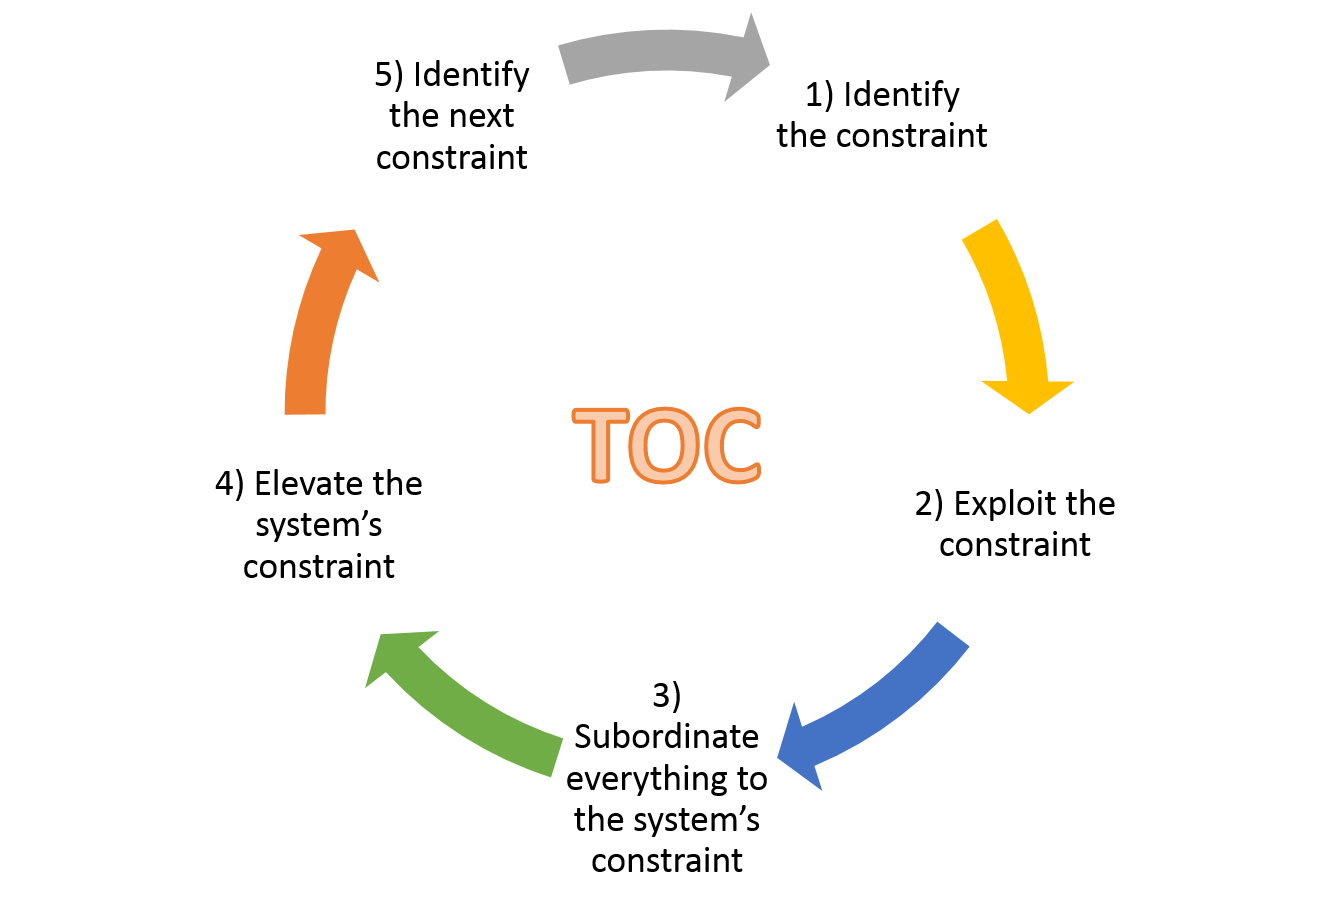 Theory Of Constraints